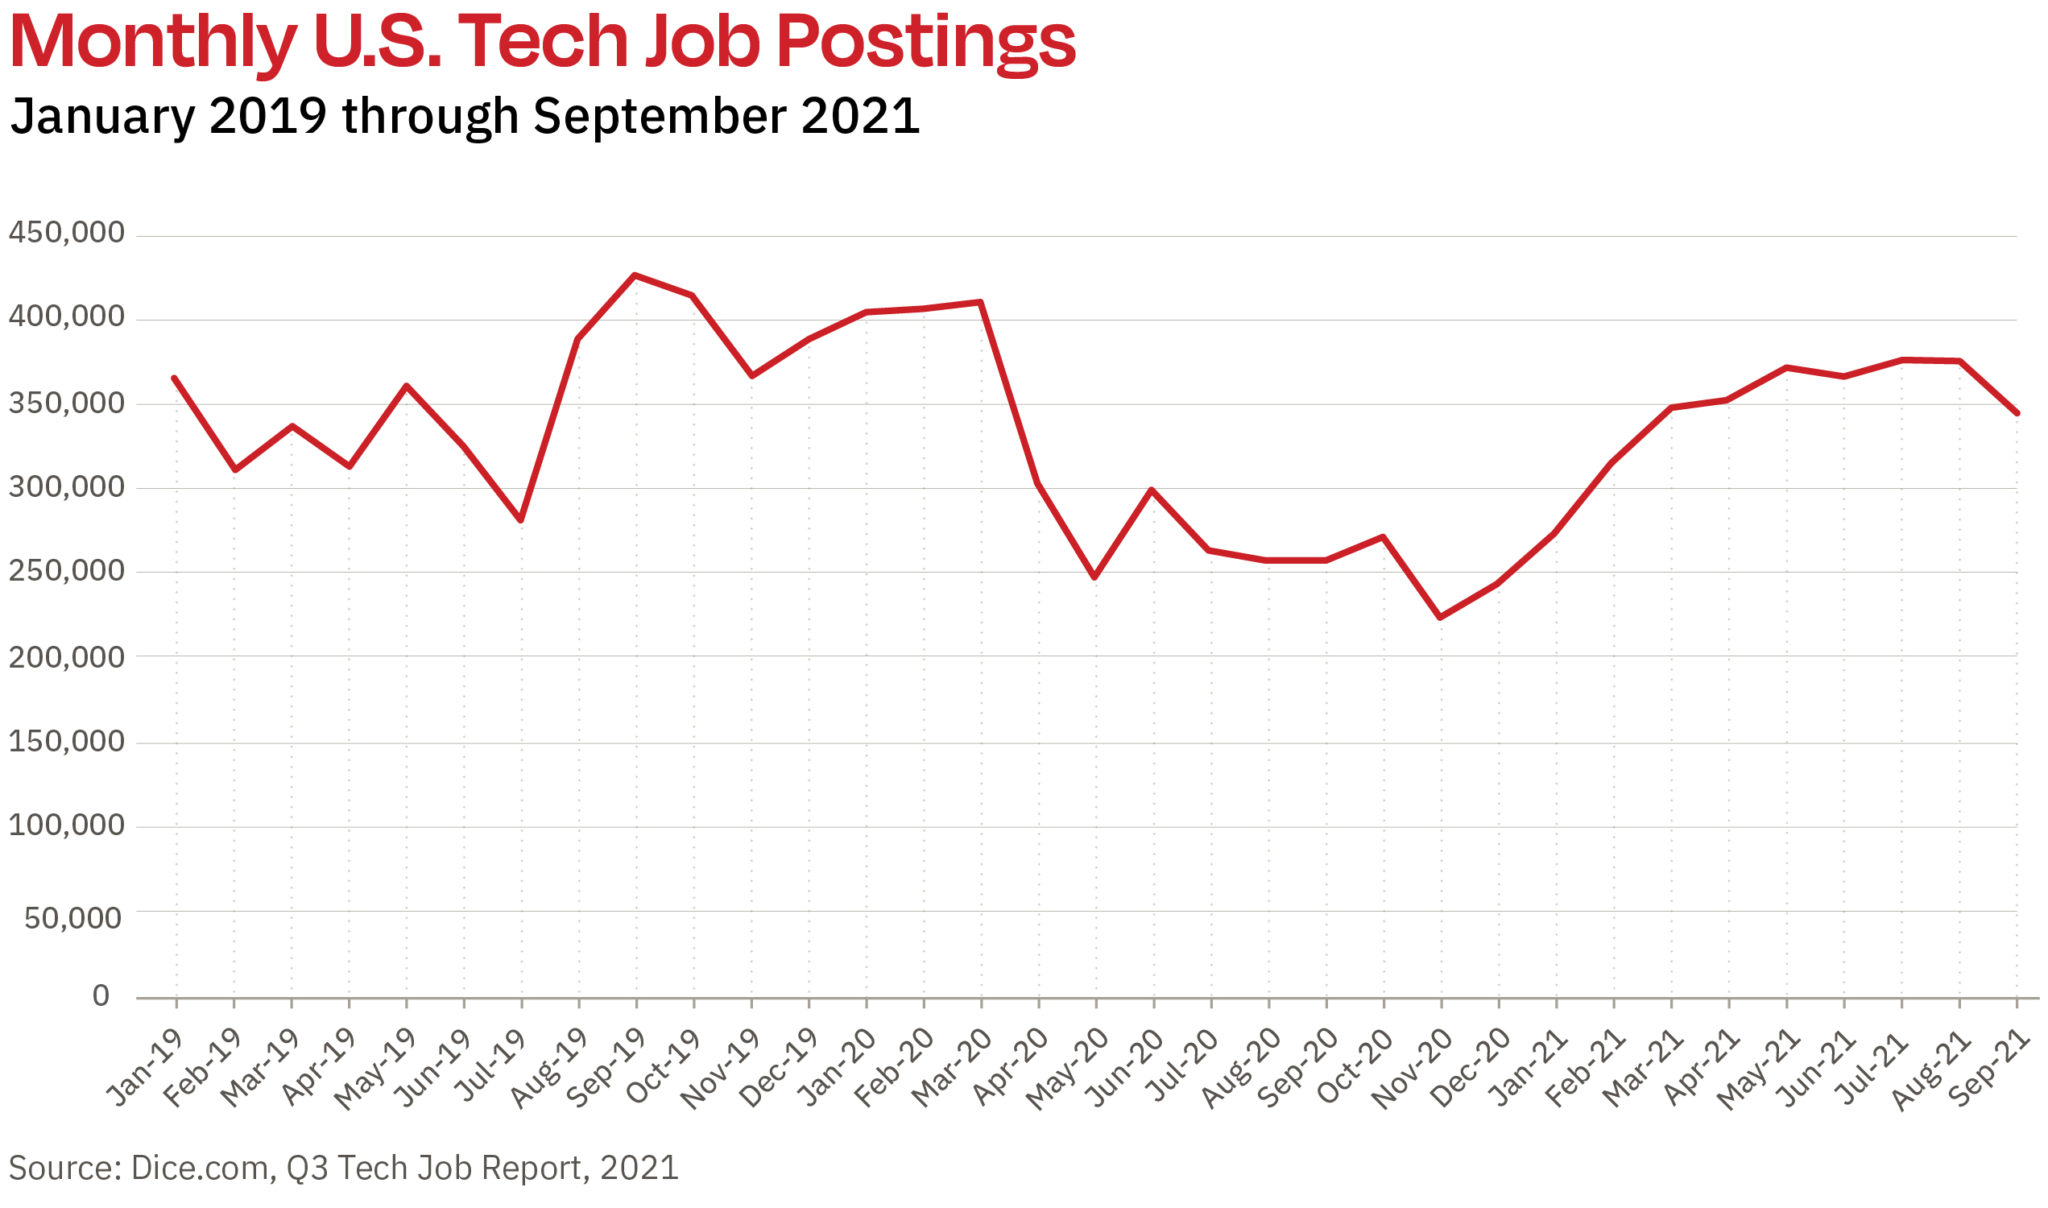 Dice Tech Job Report: Postings in Q3 Up 39% Over 2020, Nearing 2019 Pre-COVID Highs